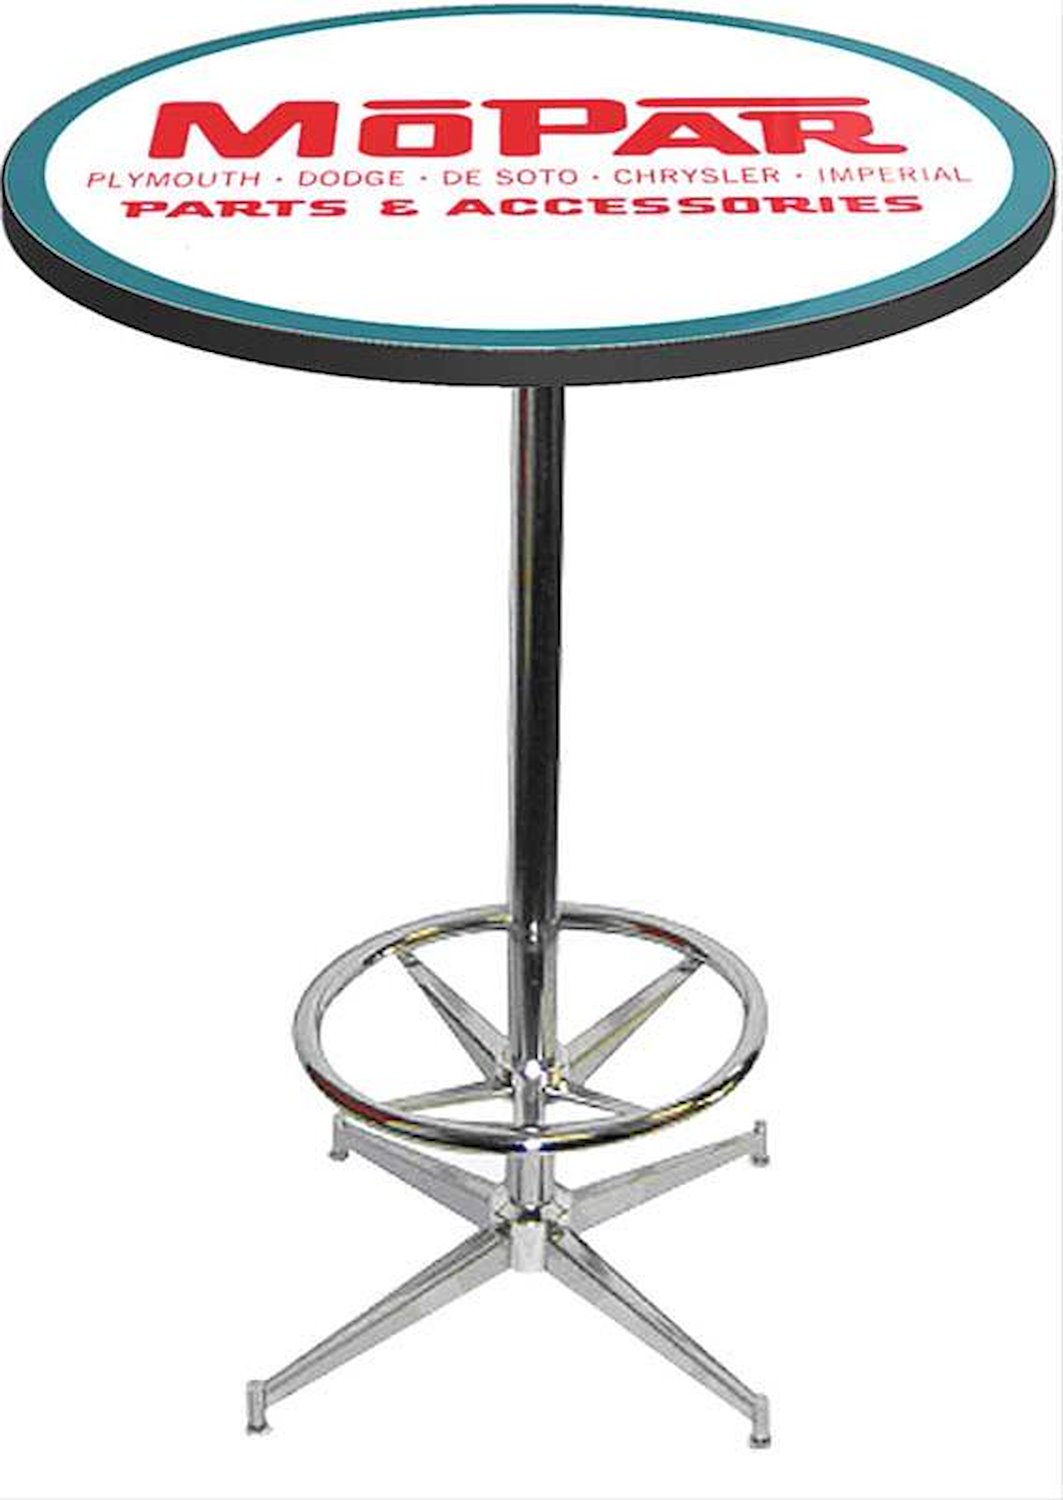 MD673105 Pub Table With Chrome Base And Foot Rest 1948-53 Style Mopar parts And Accessories Logo Pub Table With Chrome Base And